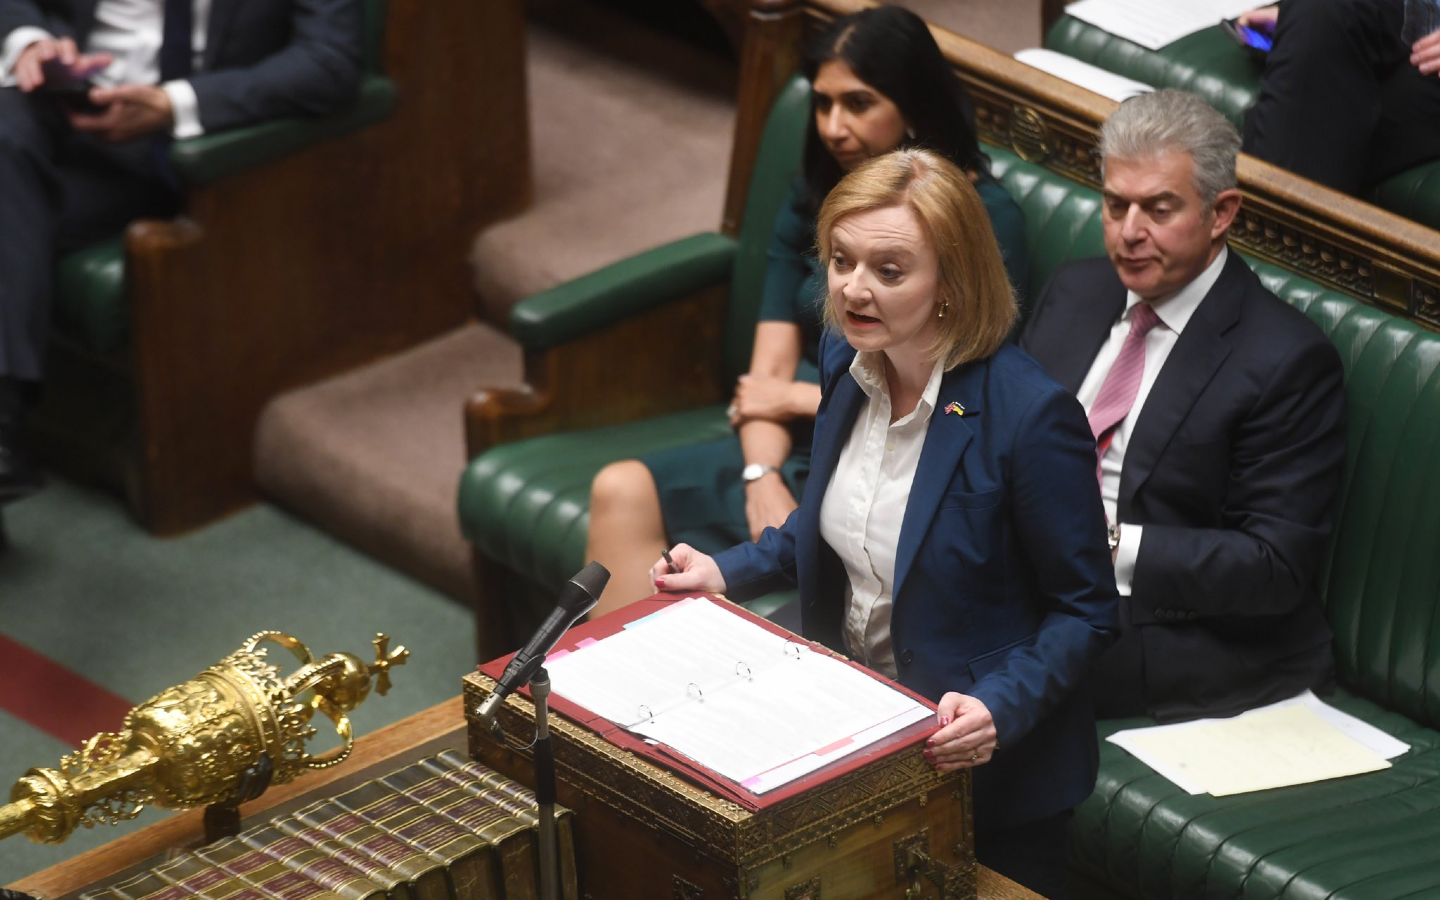 Foreign Secretary Liz Truss MP making a statement on the Northern Ireland Protocol, House of Commons, 17 May 2022. (©UK Parliament/Jessica Taylor)